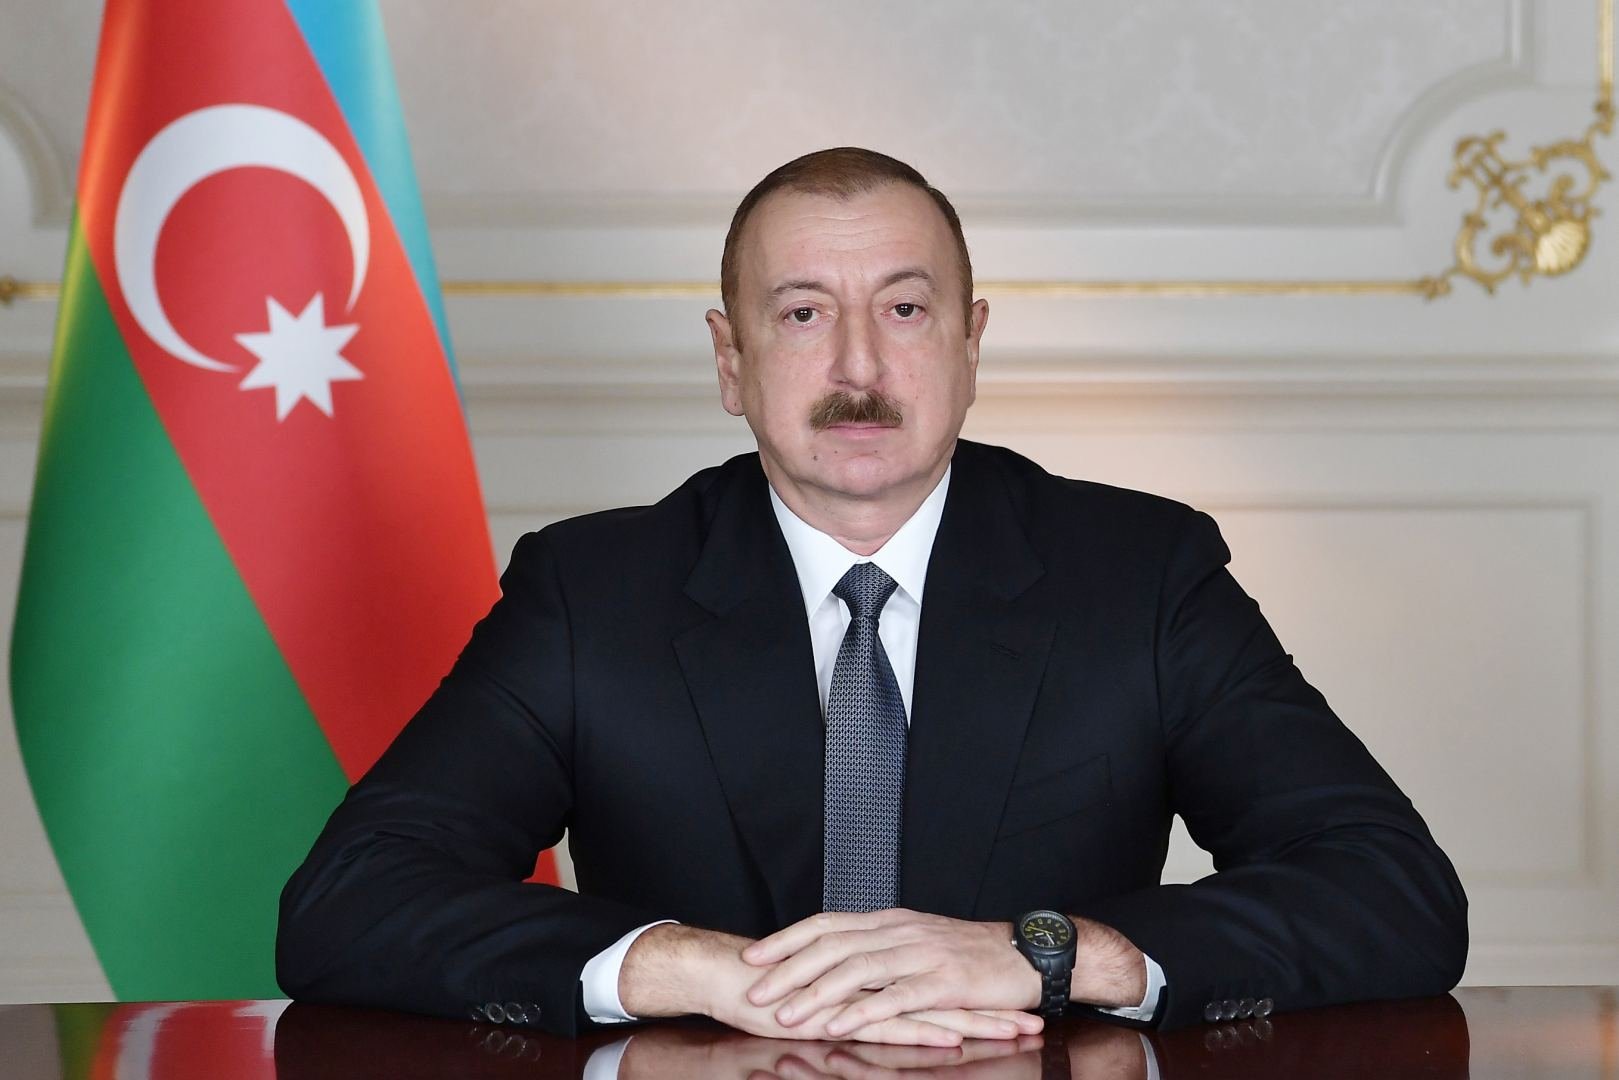 President Ilham Aliyev extends congratulations to newly-appointed UK Prime Minister Liz Truss